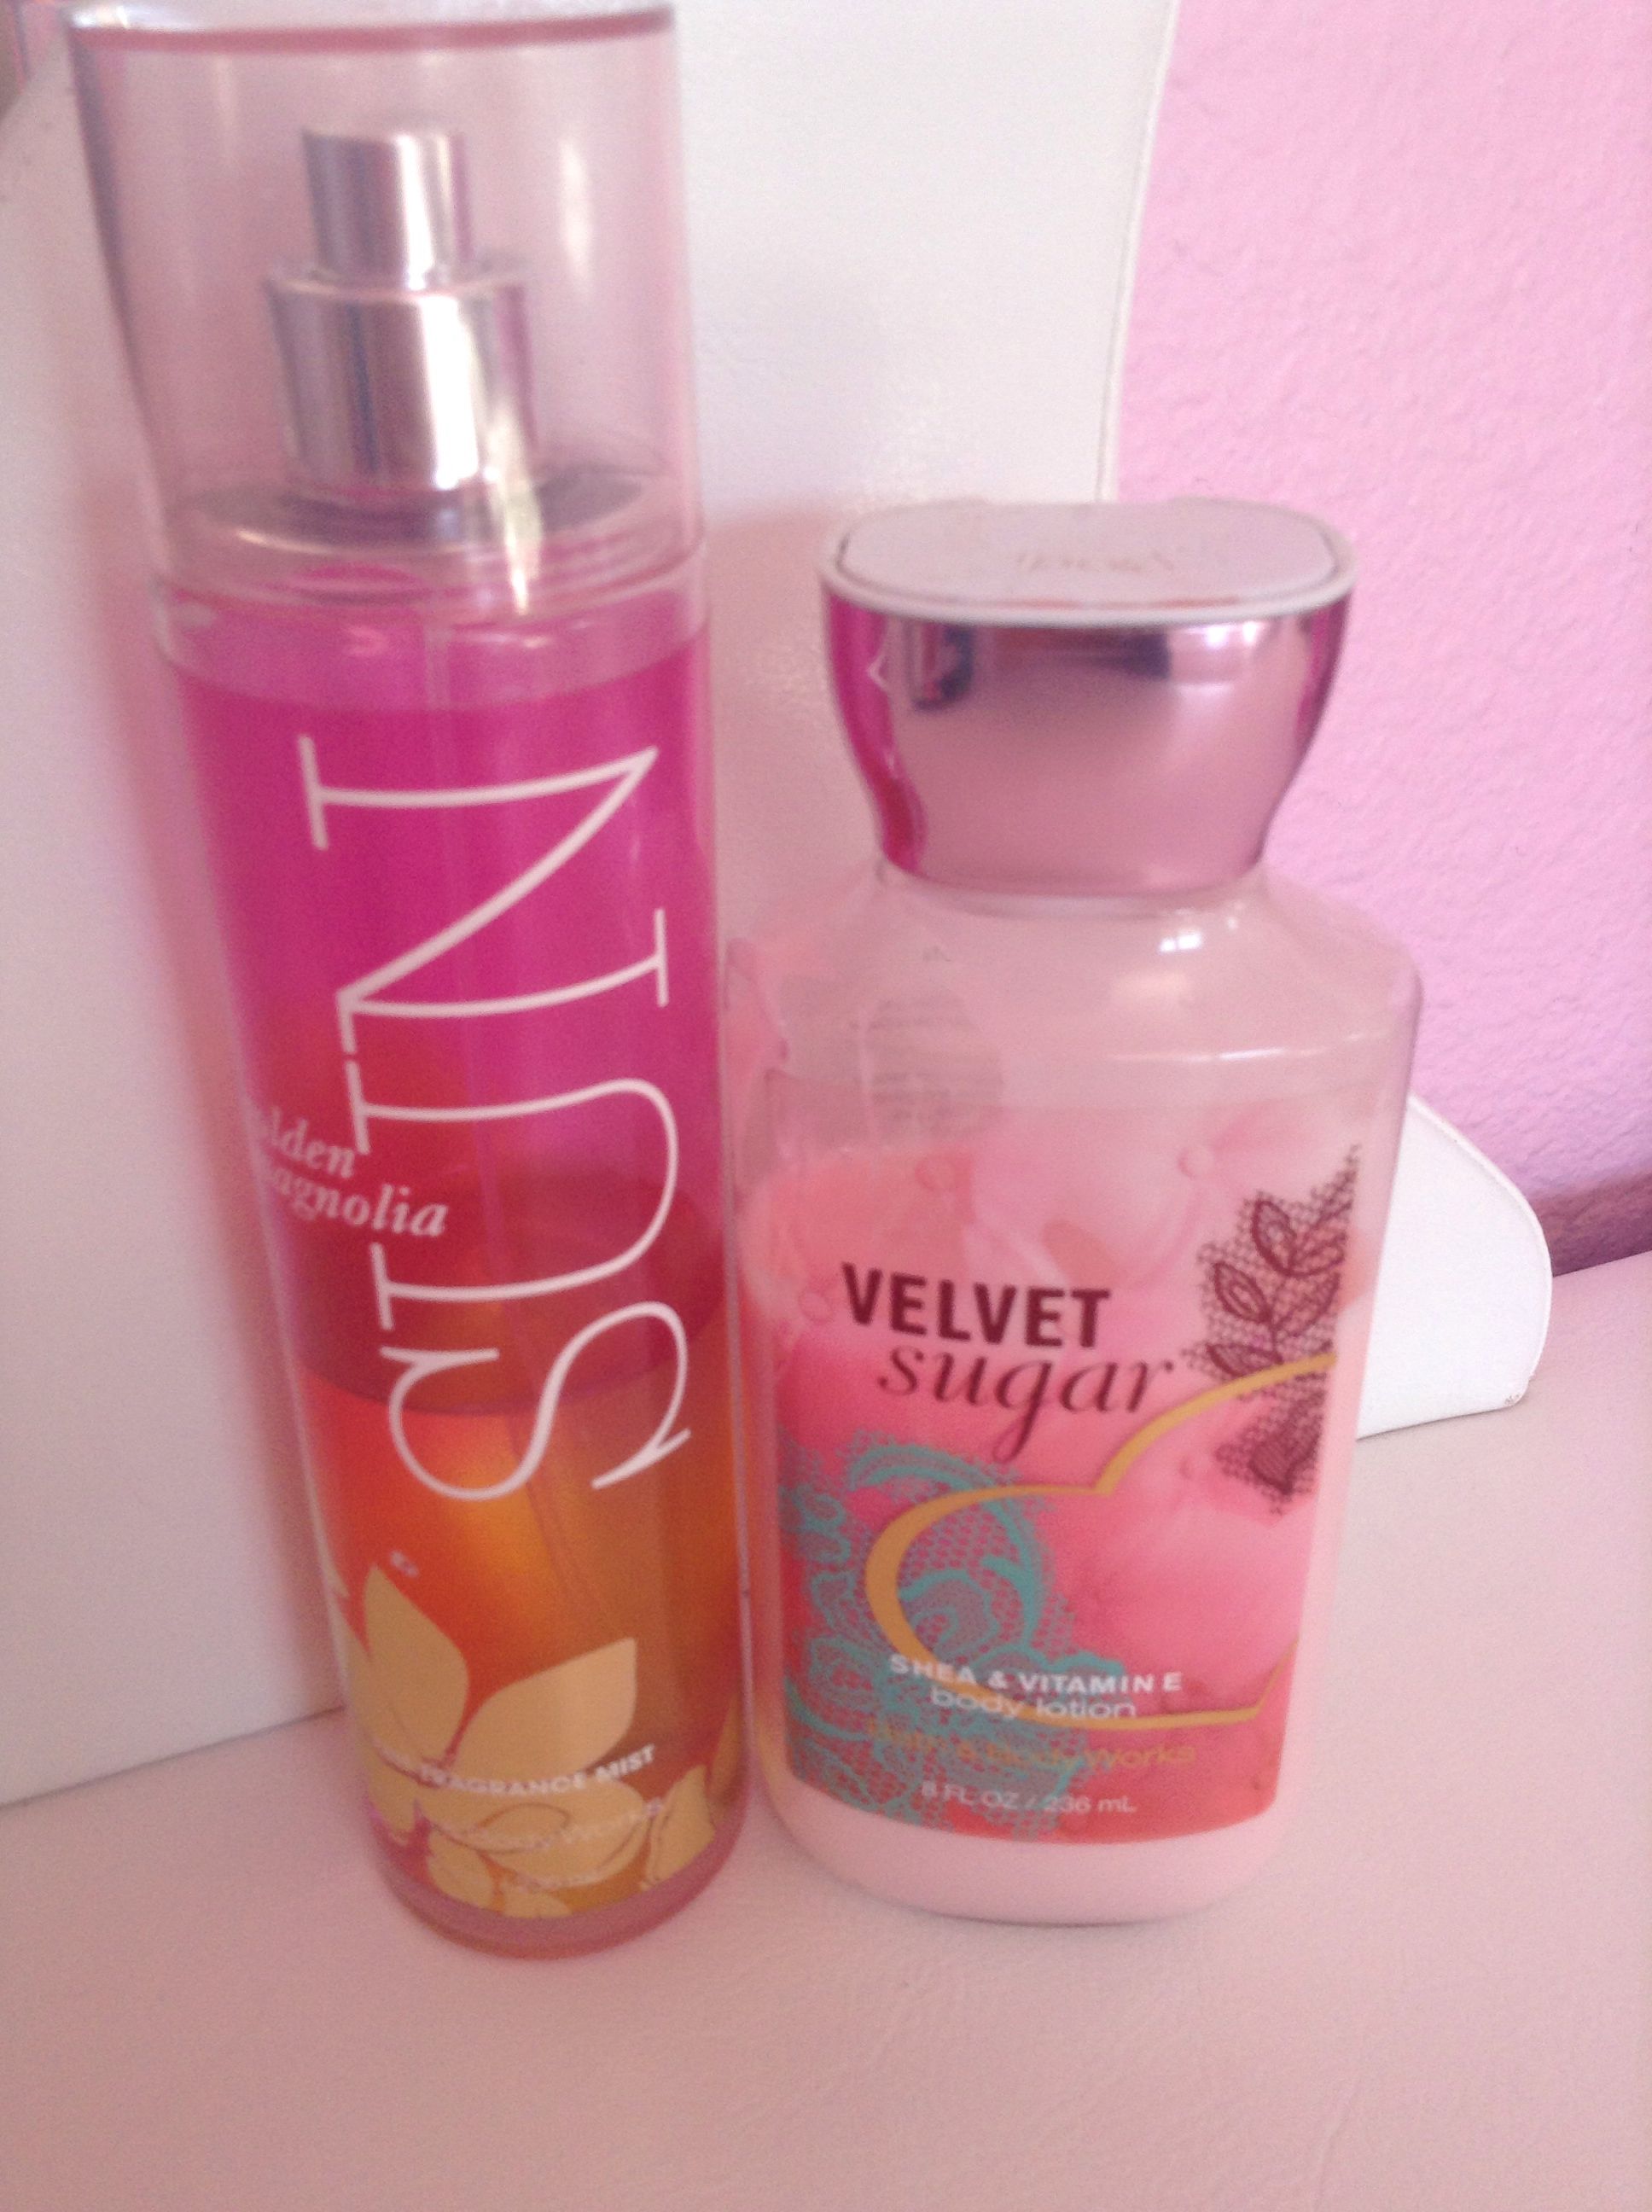 My favourite perfume and lotion velvet sugar and golden mangolia sun ...